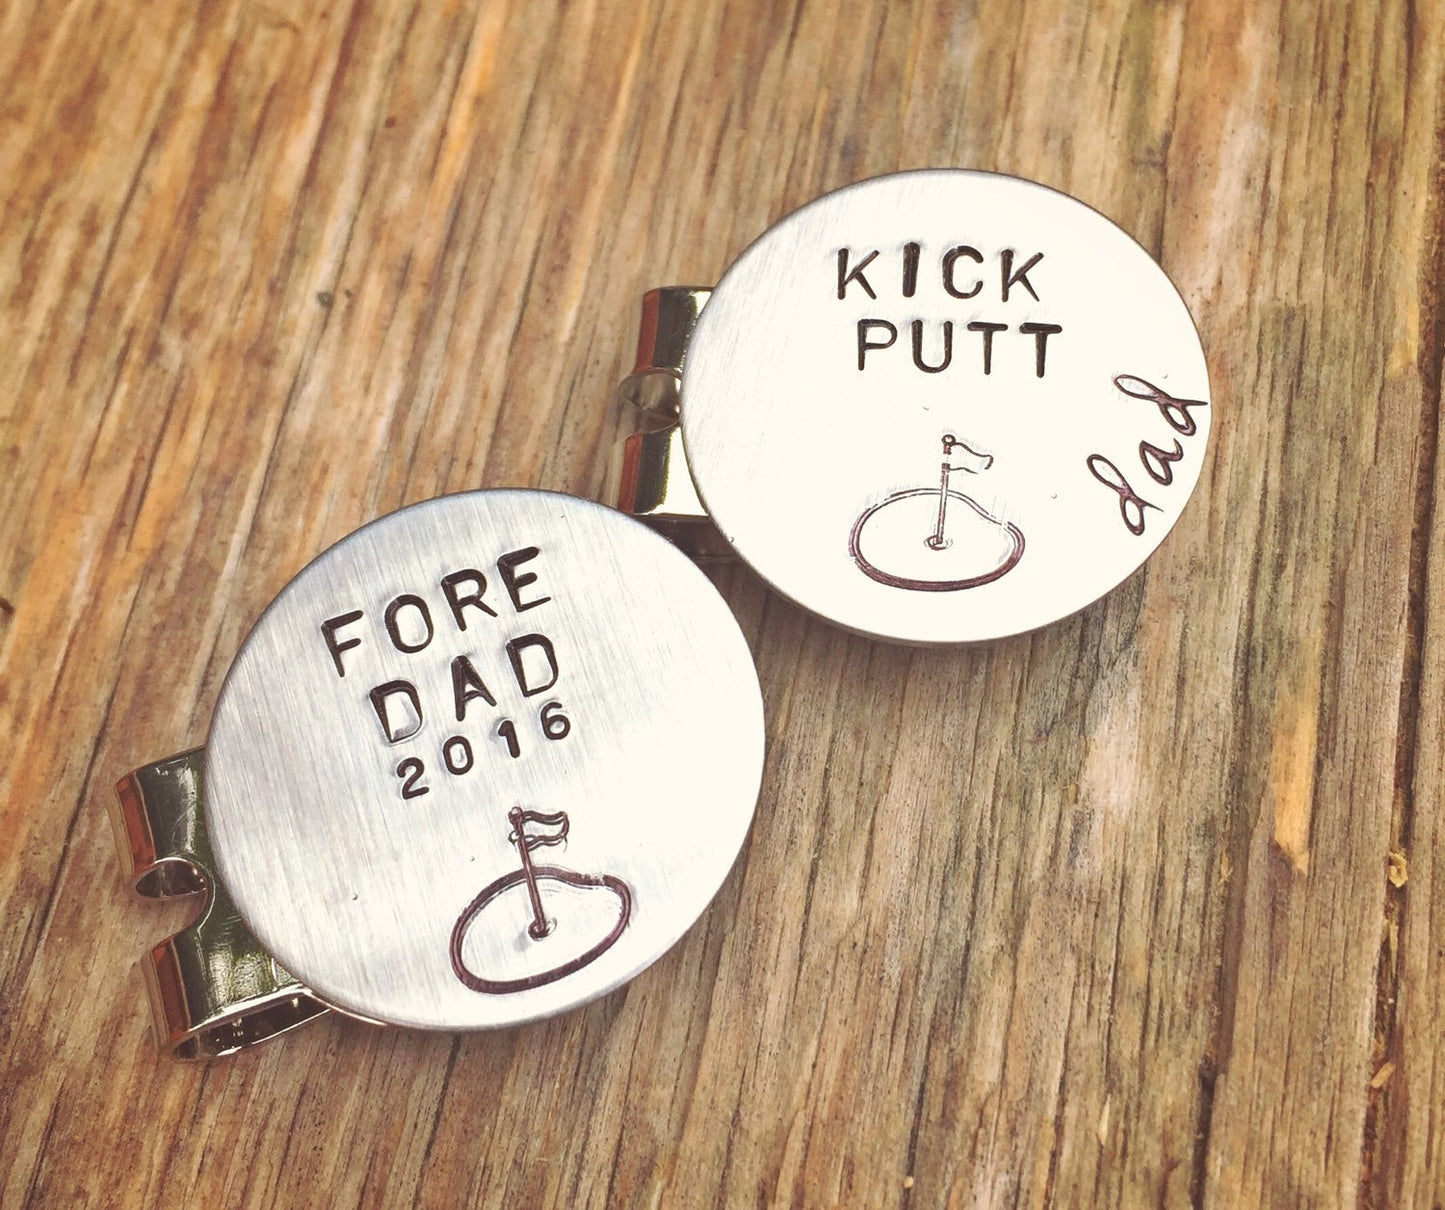 Golf Marker, Boyfriend Gifts, Golf Gifts, Husband Gift, Personalized Golf Marker, Hat Clip, Gifts for Dad, natashaaloha - Natashaaloha, jewelry, bracelets, necklace, keychains, fishing lures, gifts for men, charms, personalized, 